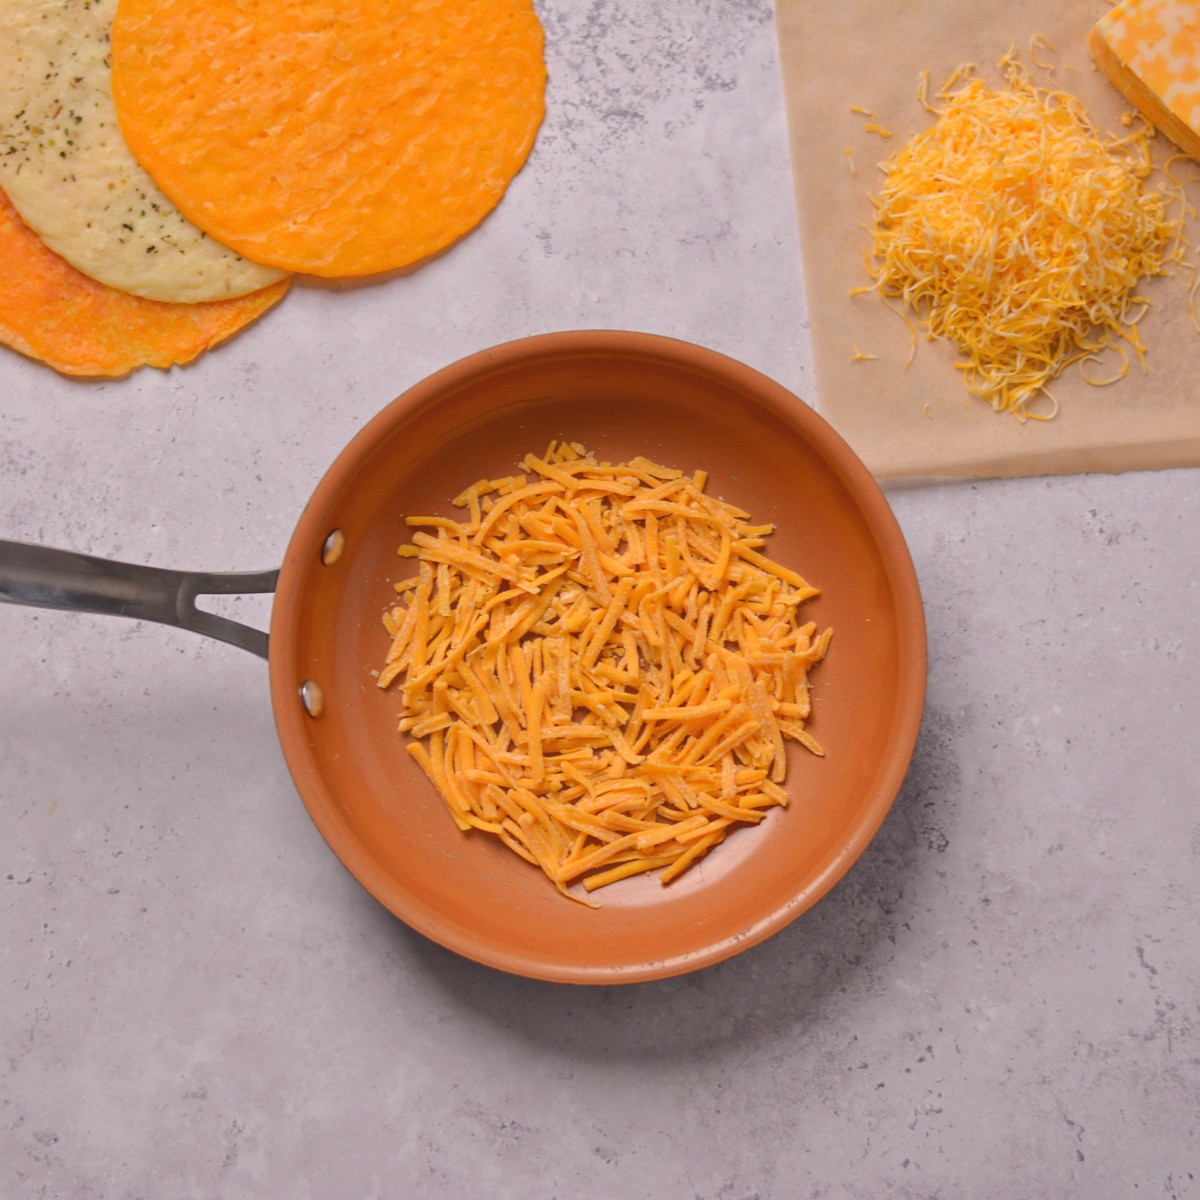 A pan with shredded cheese.